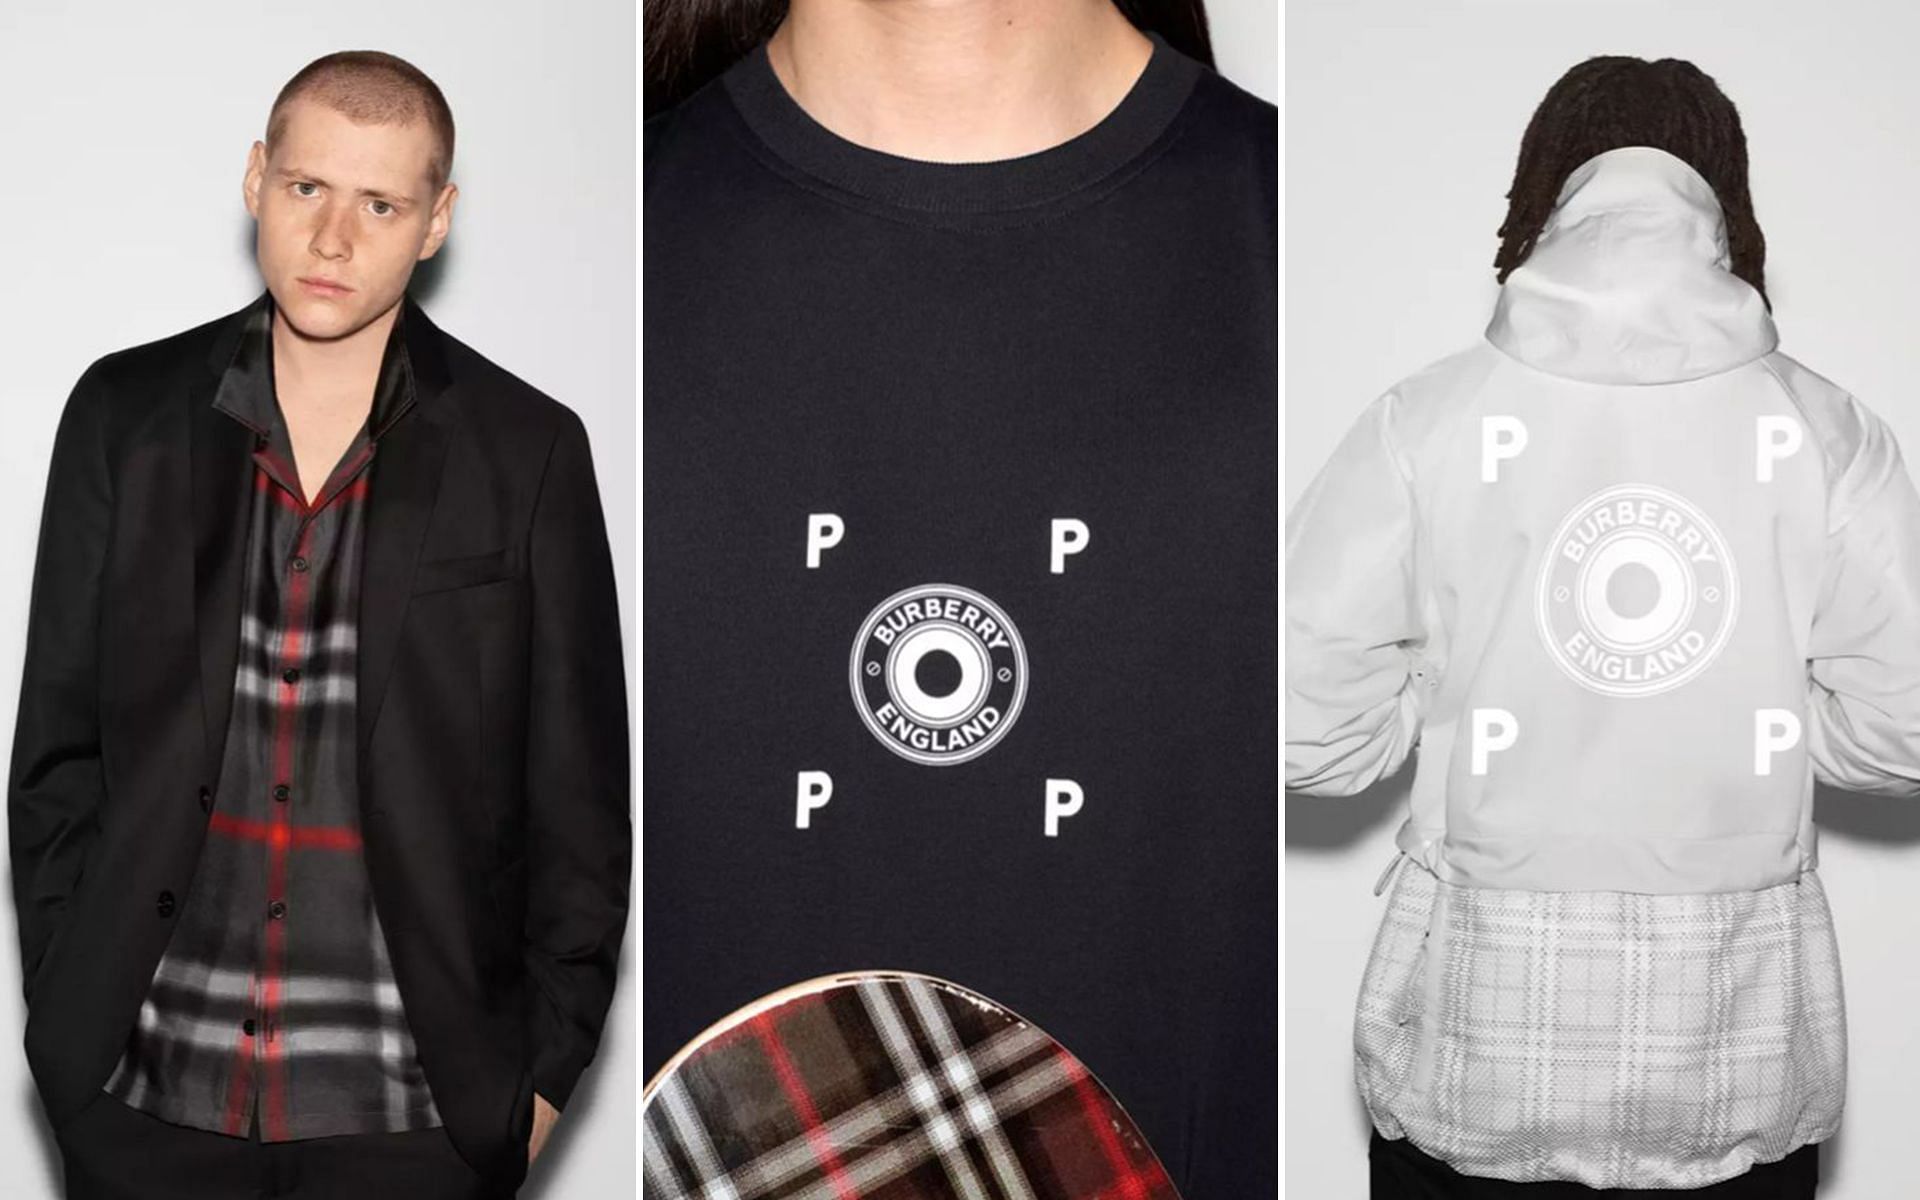 Burberry X Pop Trading Company created a capsule collection (Image via Burberry)